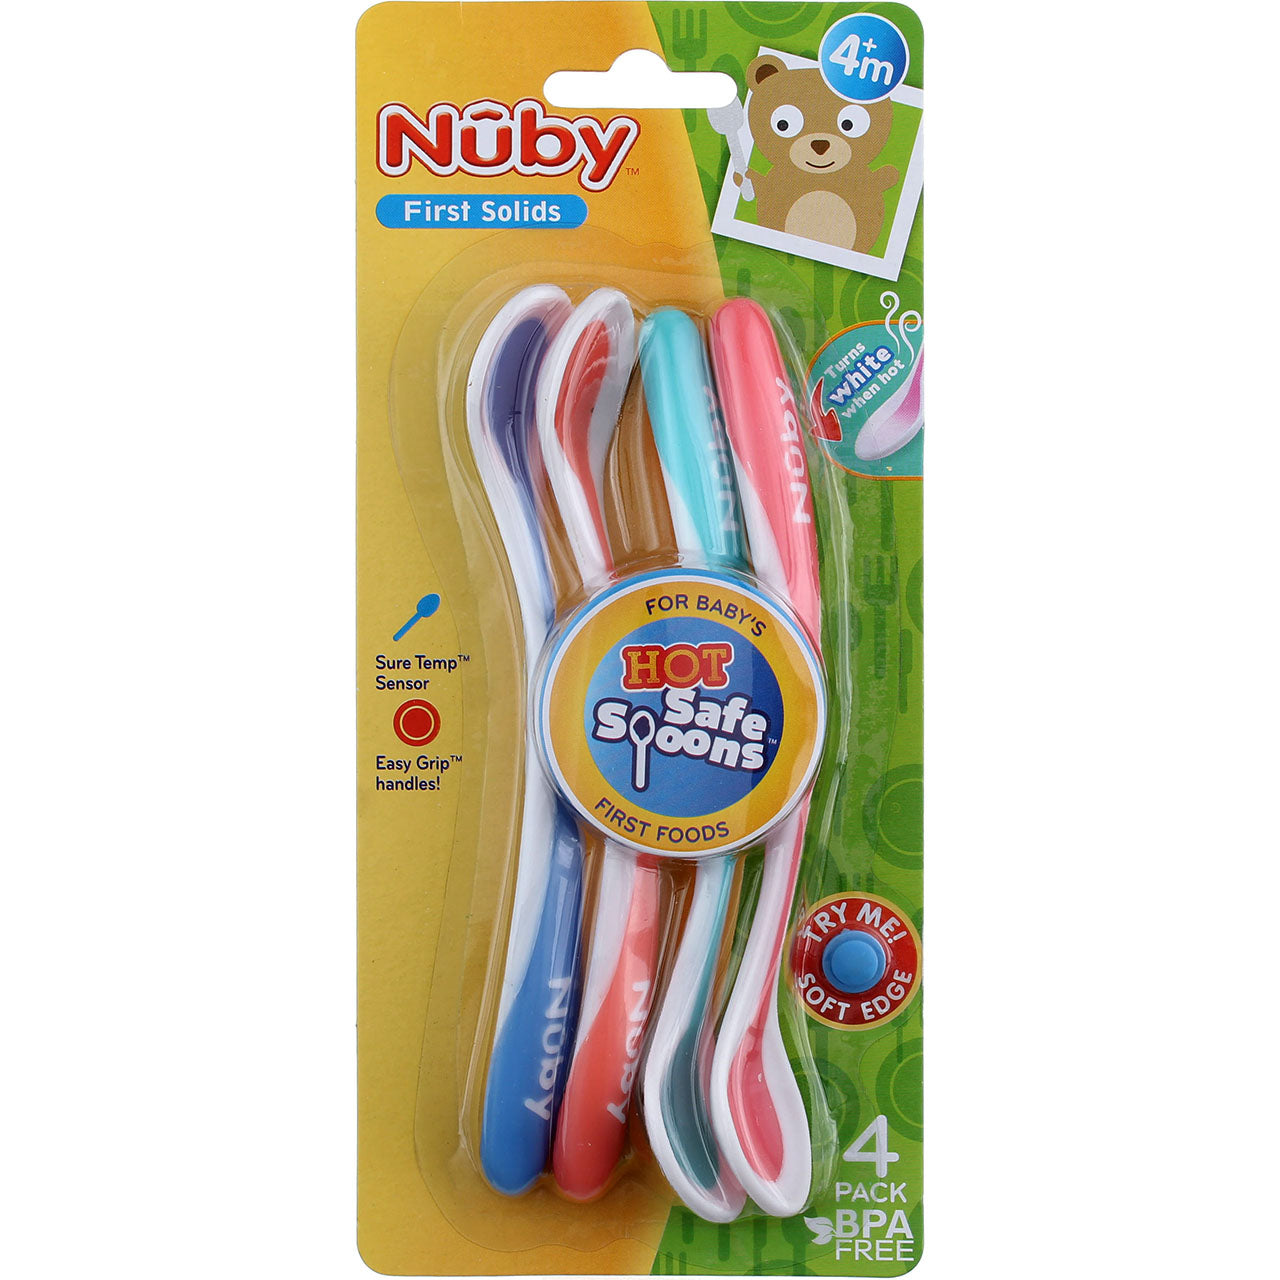 Nuby 3 Stage Baby's First Spoons with Easy Grip Handle, 3 Pack Kid's  Feeding